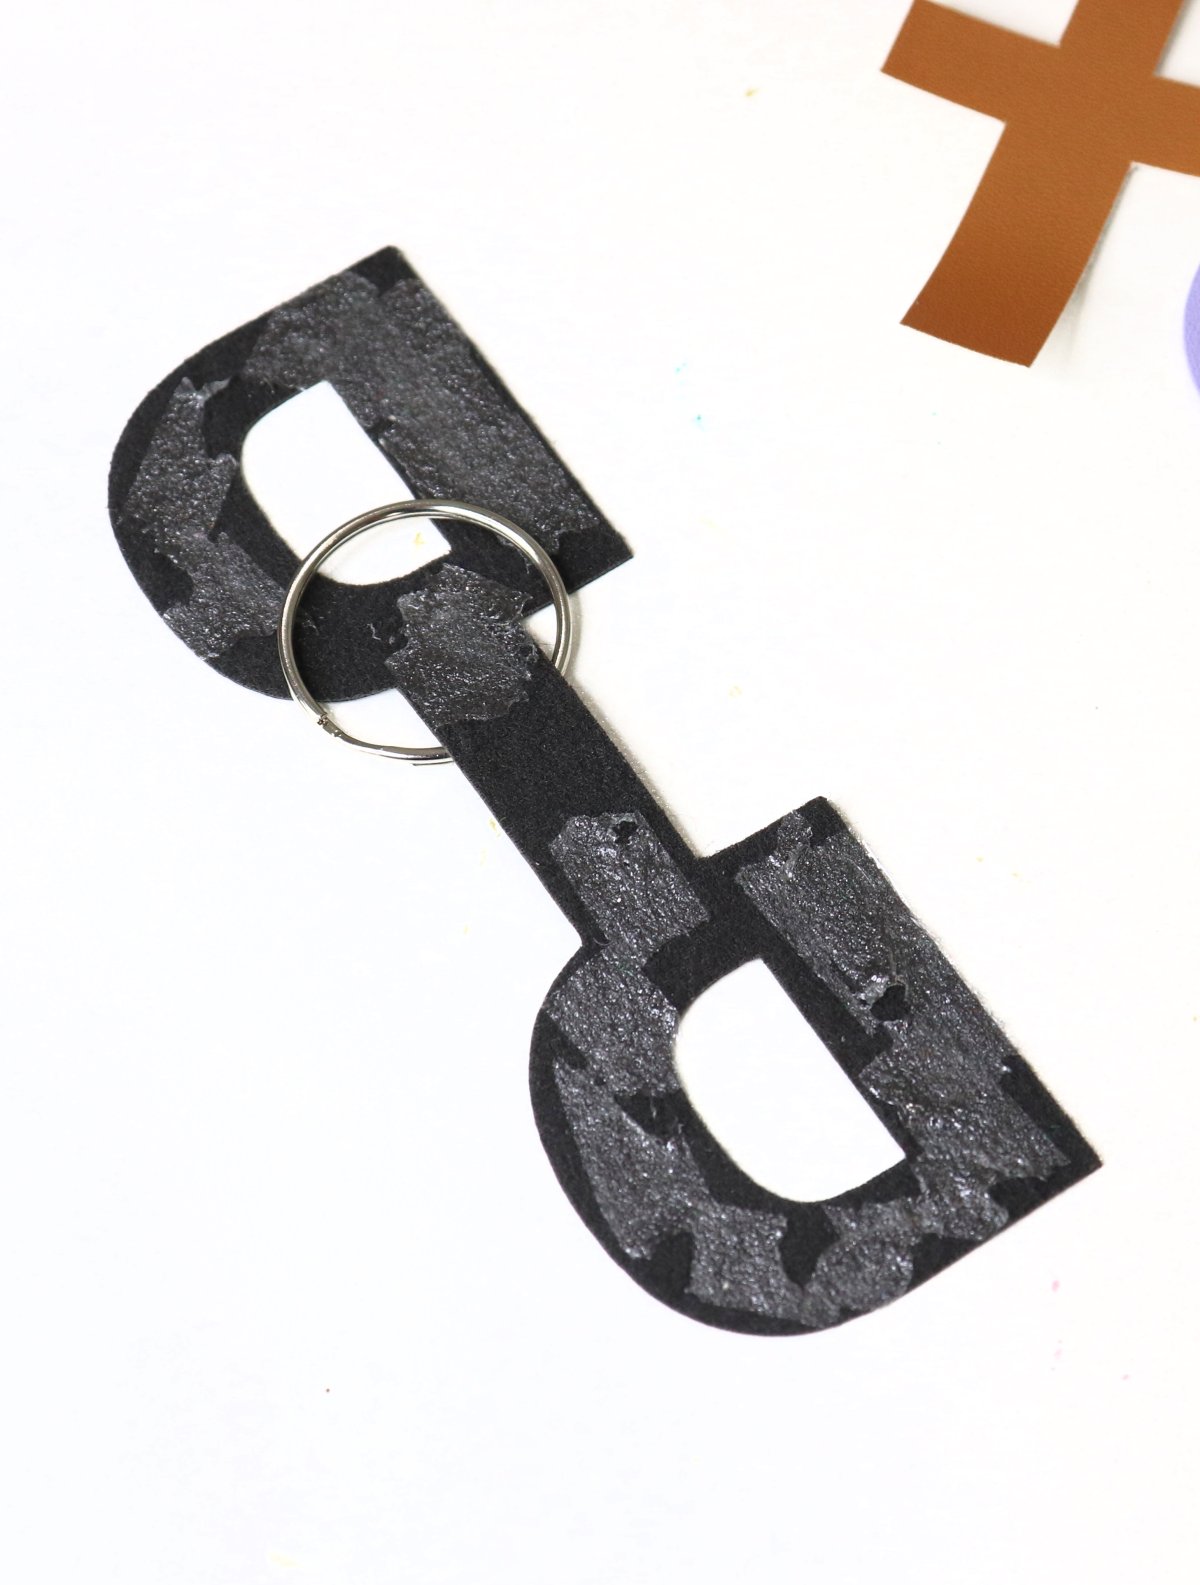 Image contains a black “D” monogram with adhesive on both sides and a keyring in the center.